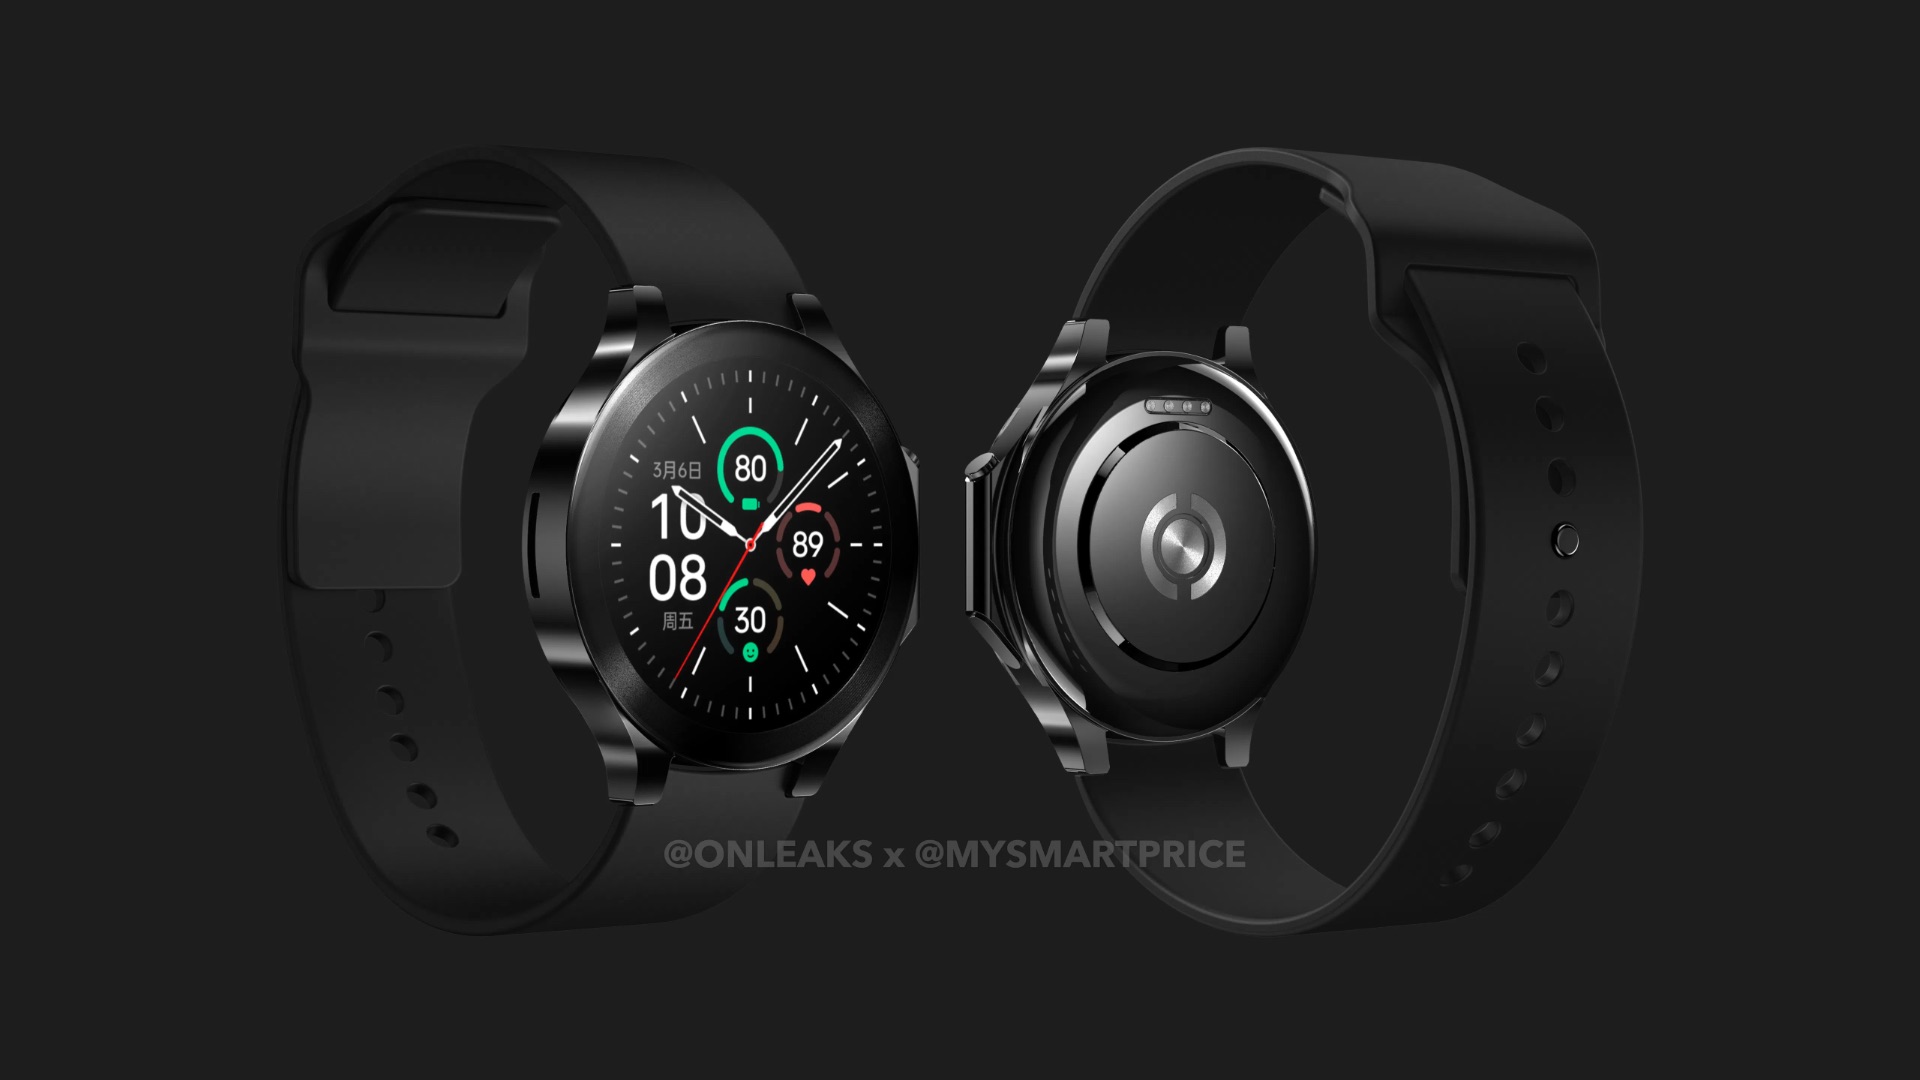 Xiaomi might compete with Samsung with its Wear OS 3 smartwatch - SamMobile